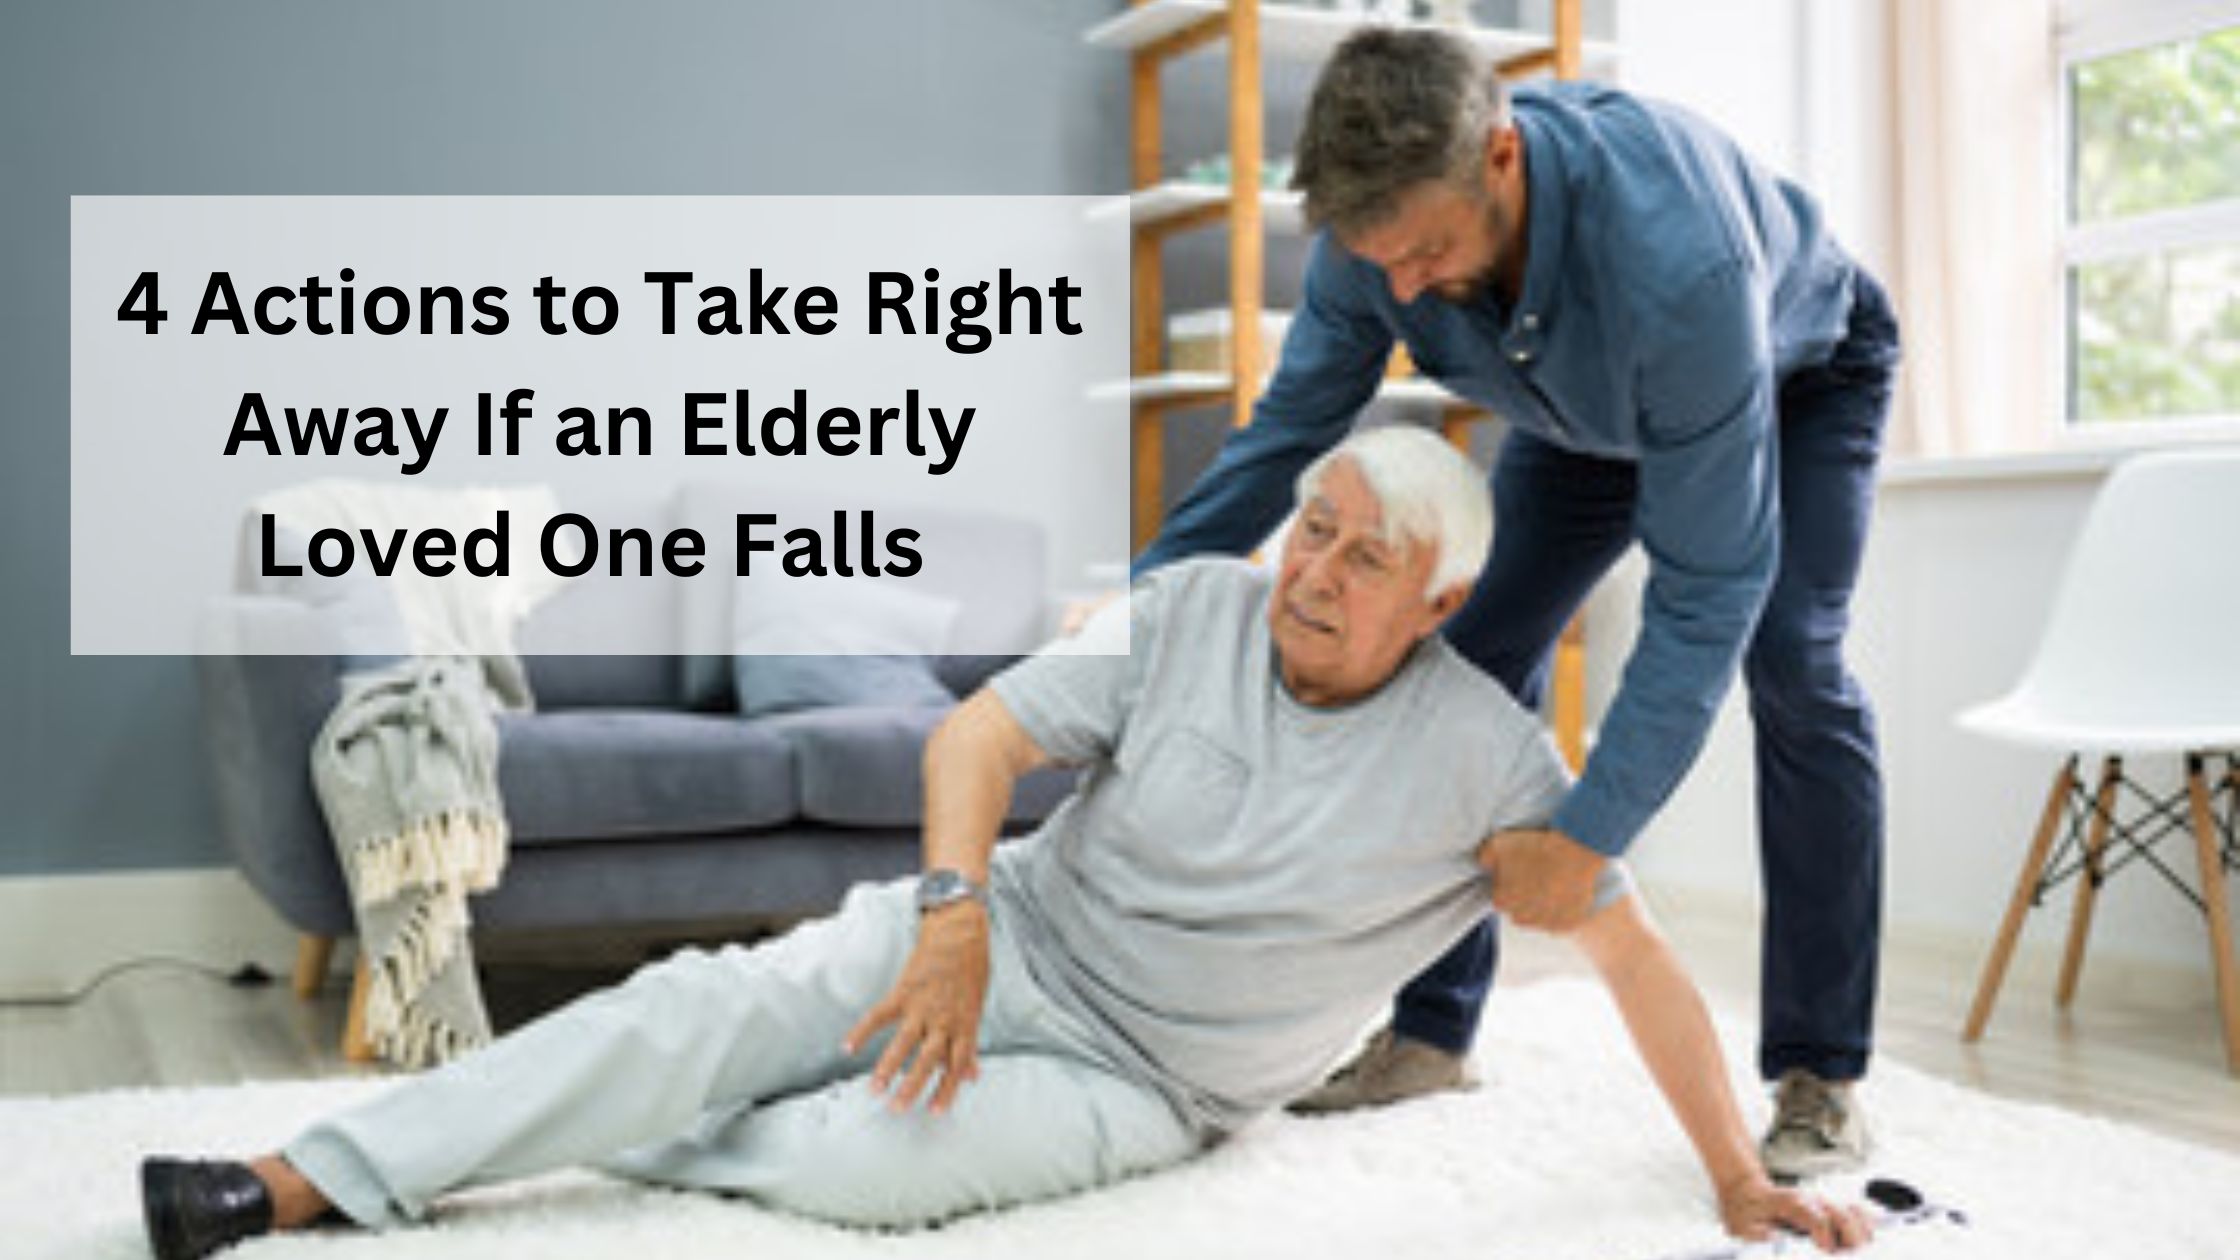 4 Actions to Take Right Away If an Elderly Loved One Falls